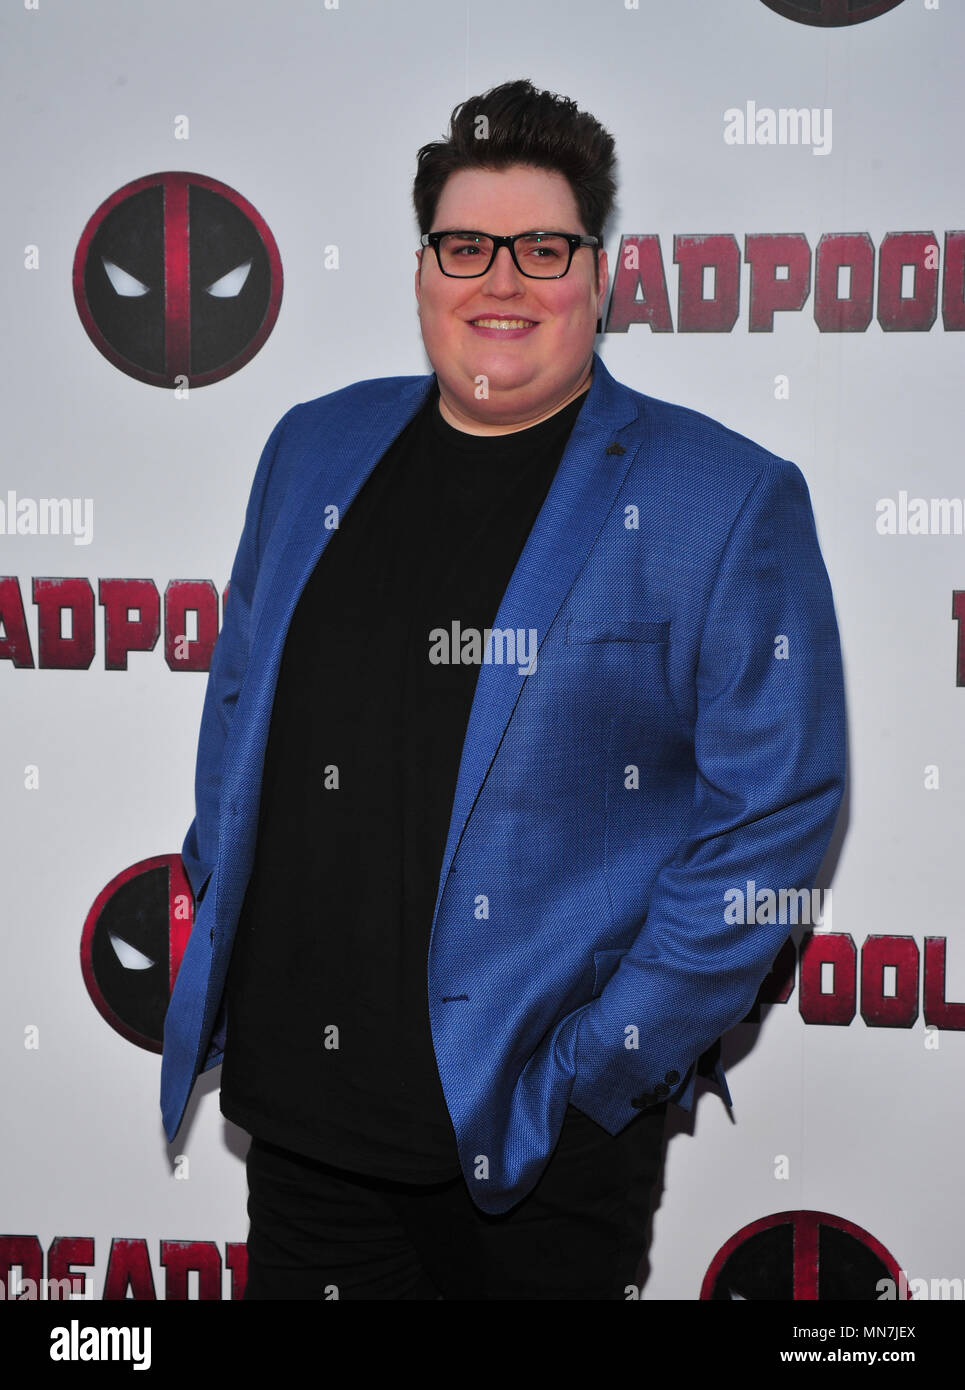 Bronx, NY, USA. 14th May, 2018. Jordan Smith attends the 'Deadpool 2'  screening at AMC Loews Lincoln Square on May 14, 2018 in New York City.  Credit: John Palmer/Media Punch/Alamy Live News